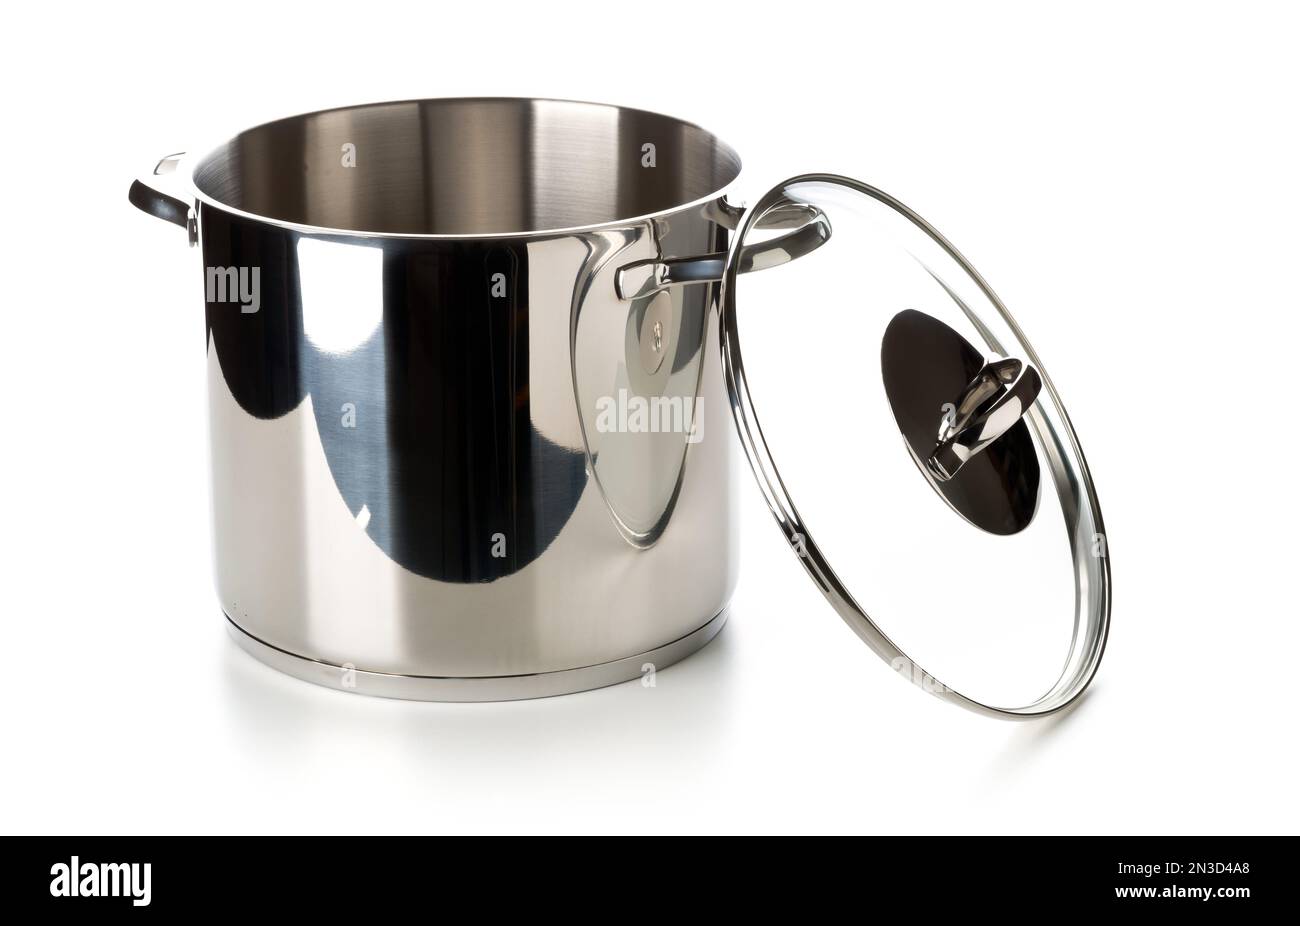 Large stainless steel cooking pot elevated view with glass lid leaning on the right side over white background Stock Photo